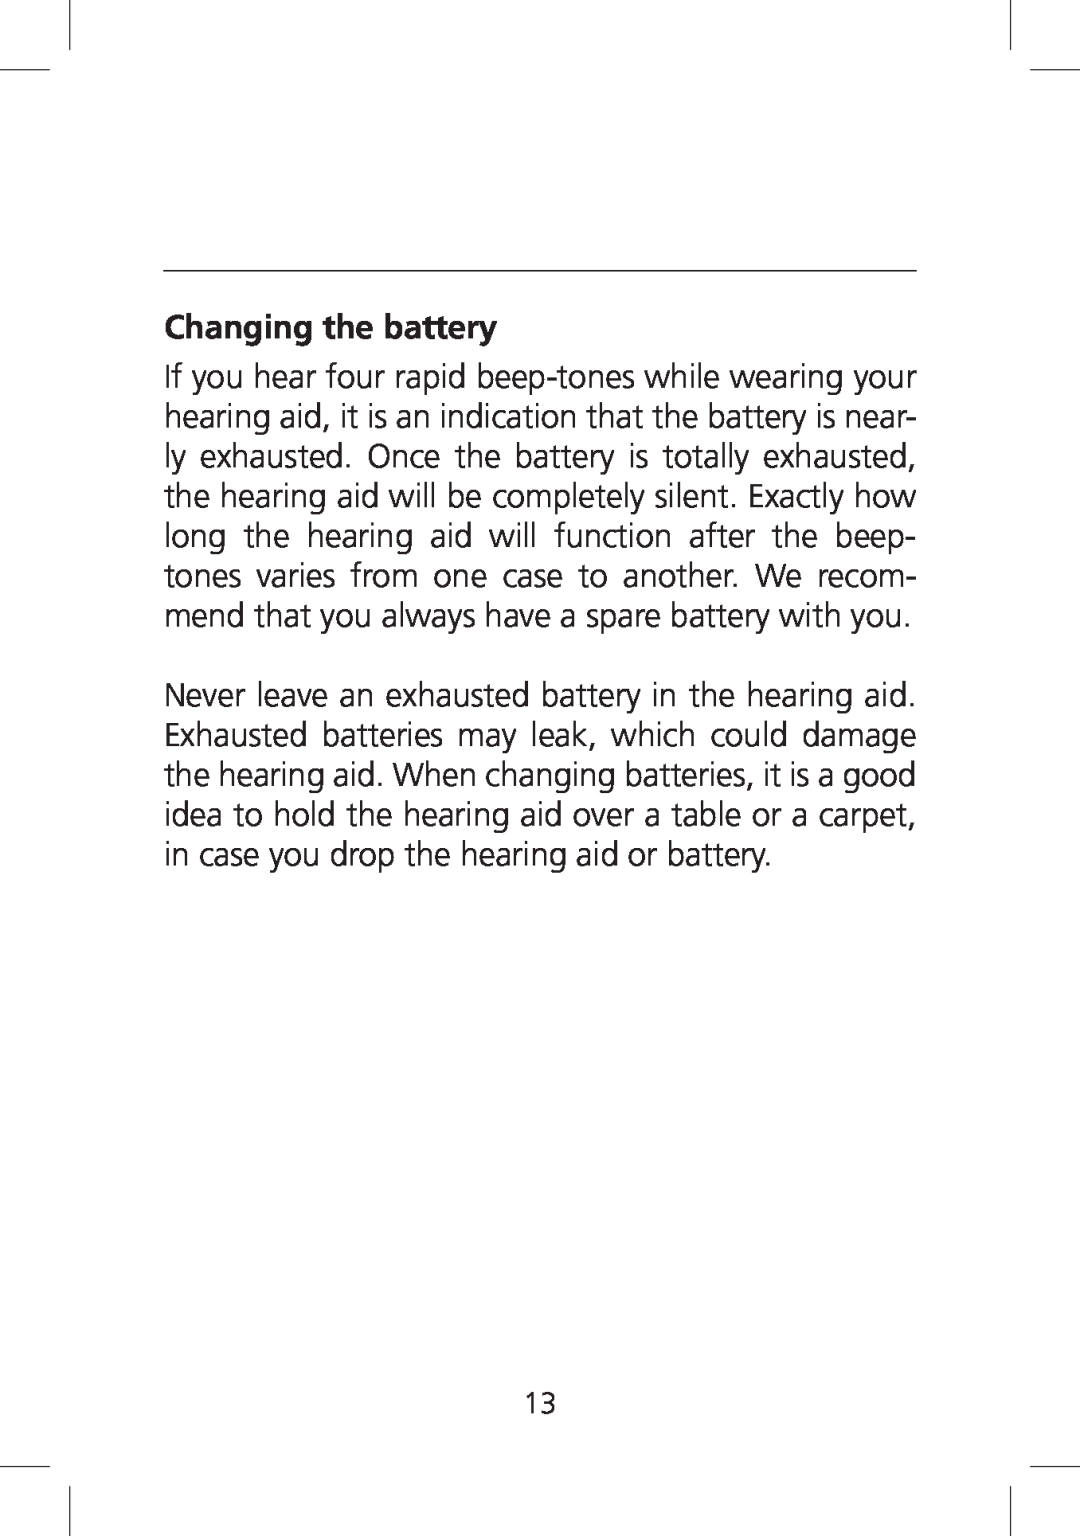 SV Sound SV-19 manual Changing the battery 